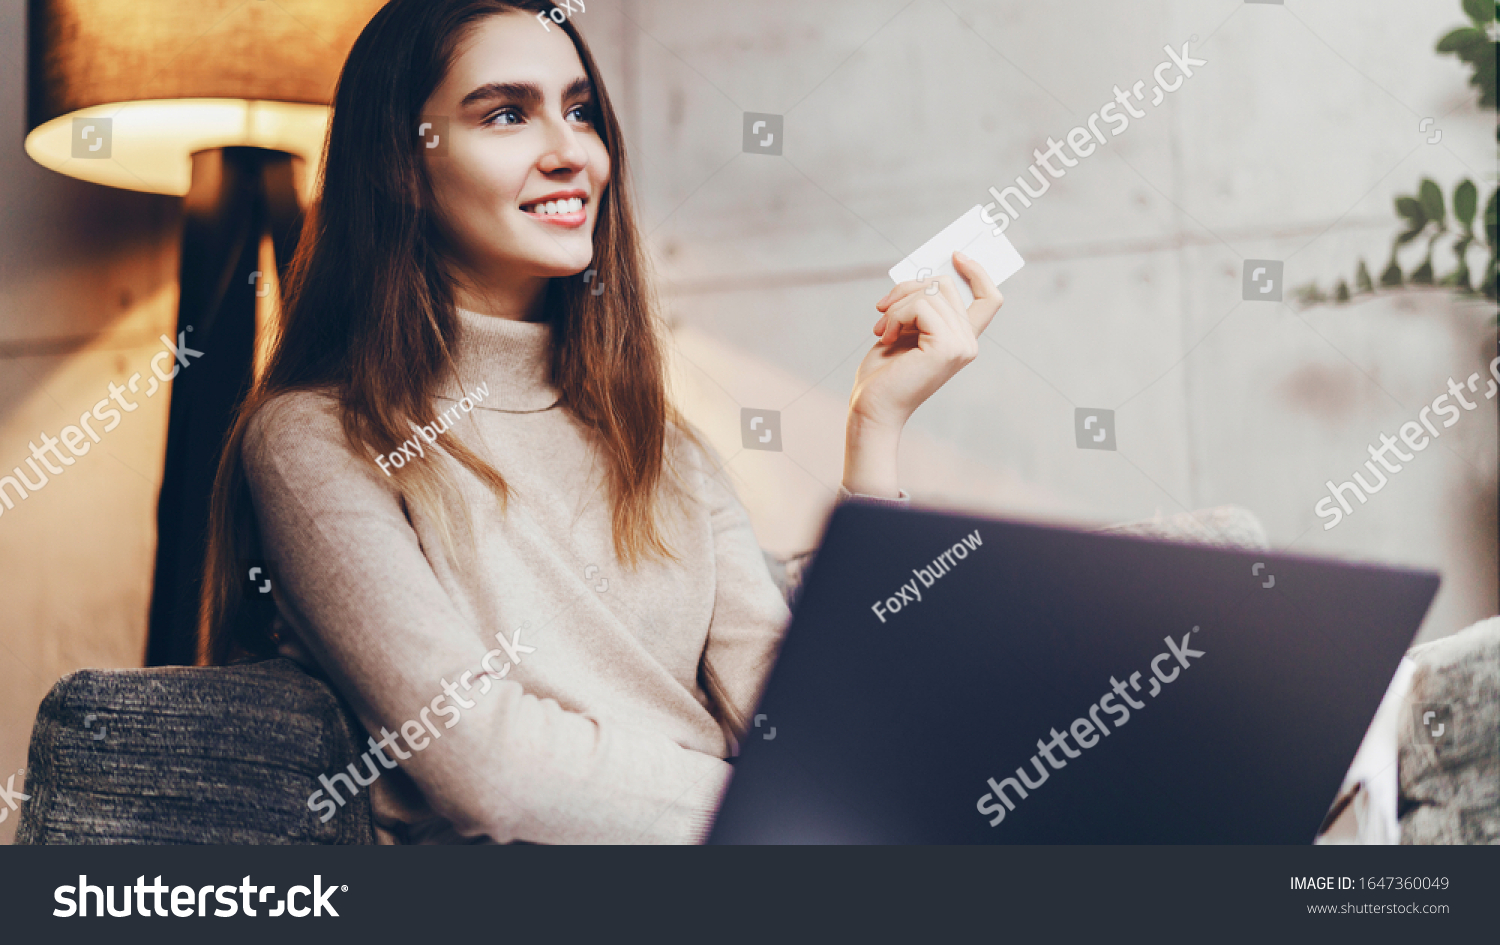 Girl using bank card for buying things online. Retail stores offering bonus cards for customers. Select items in web shop app, transfer money safely using sms code for payment. Money refund guarantee. #1647360049